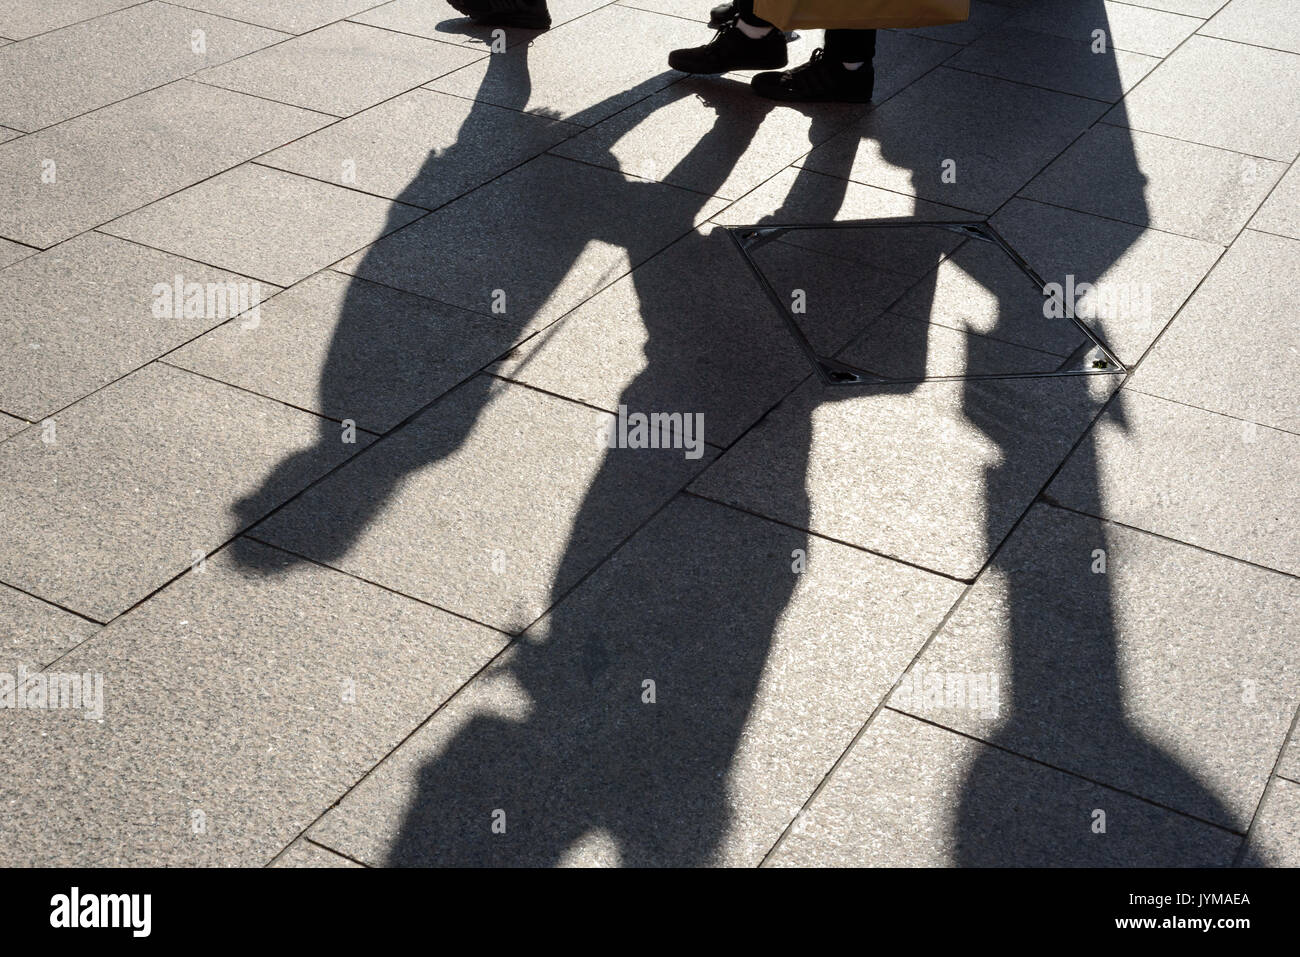 Two peoples legs and body in strong shadow on a tiled pavement in daylight Stock Photo